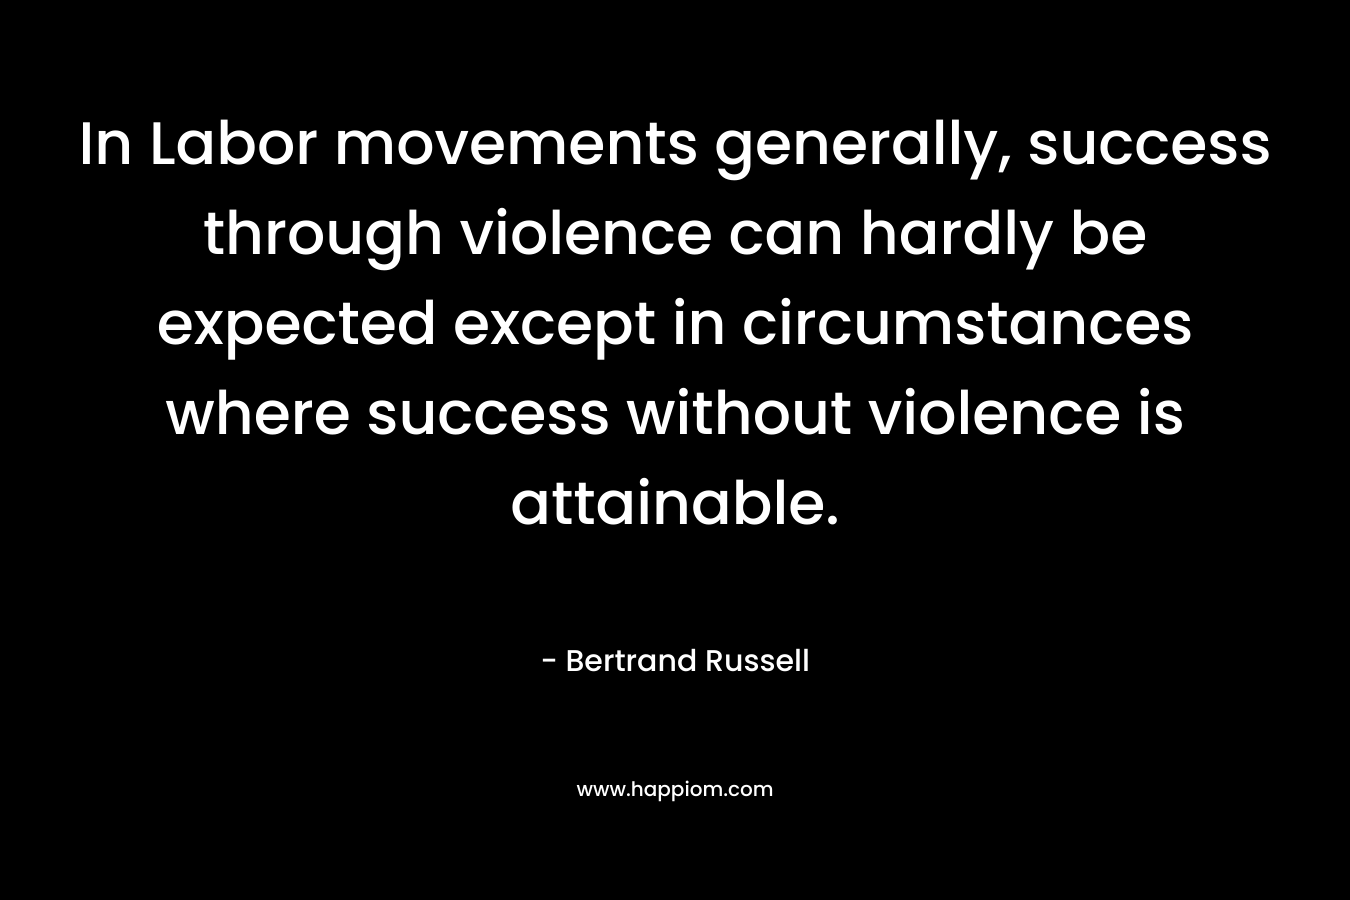 In Labor movements generally, success through violence can hardly be expected except in circumstances where success without violence is attainable. – Bertrand Russell